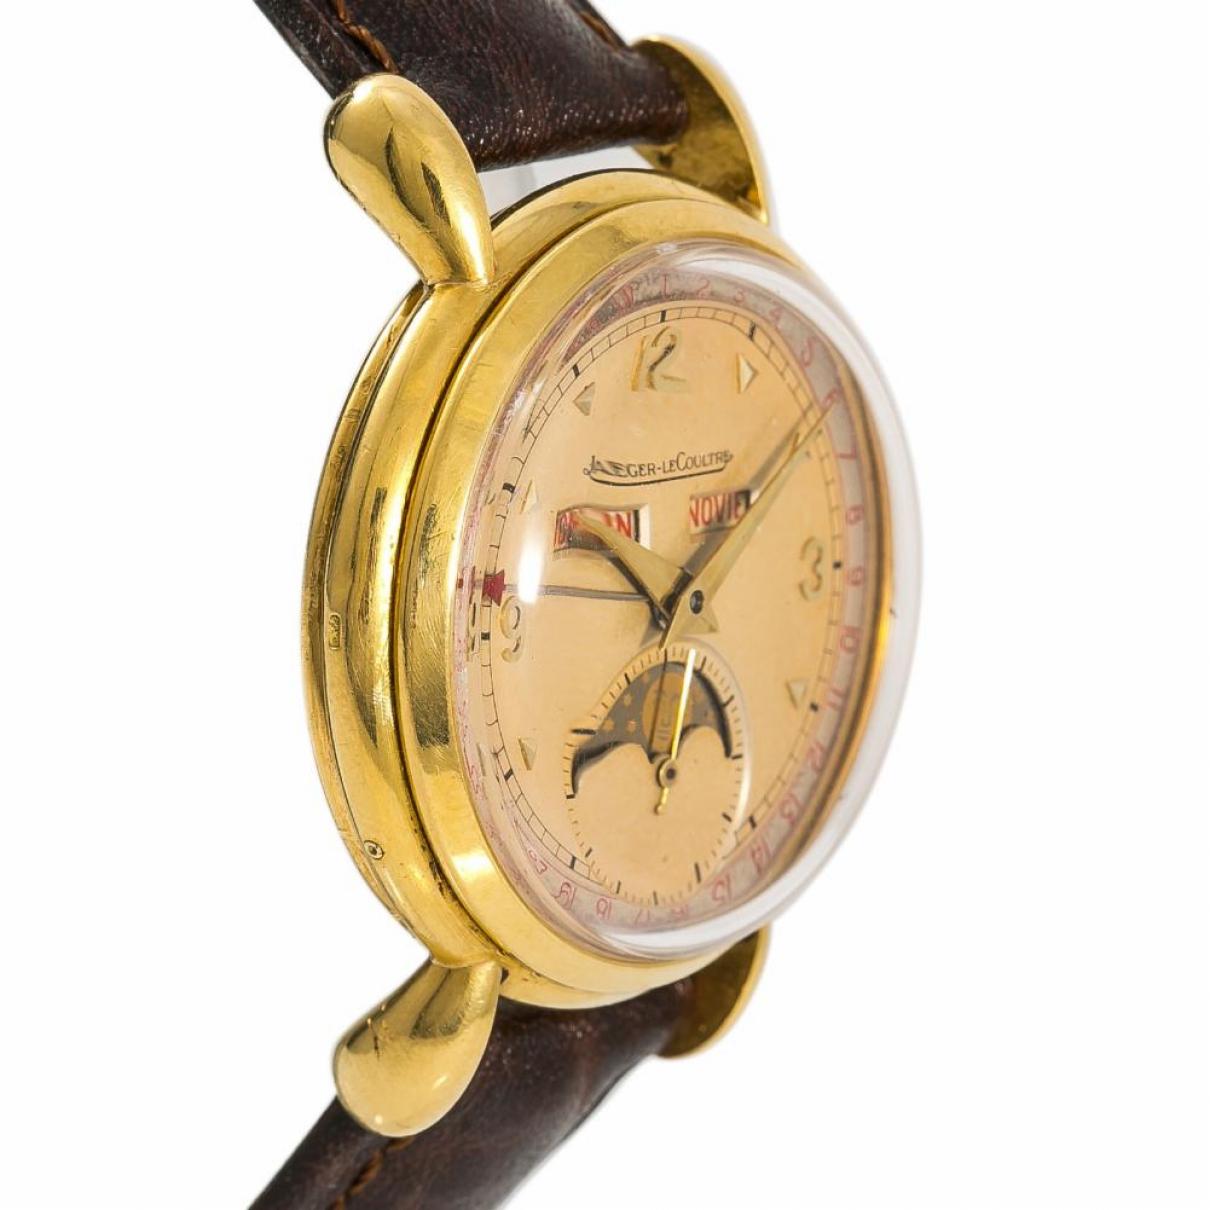 Buy Jaeger-Lecoultre Yellow gold watch online - Vintage